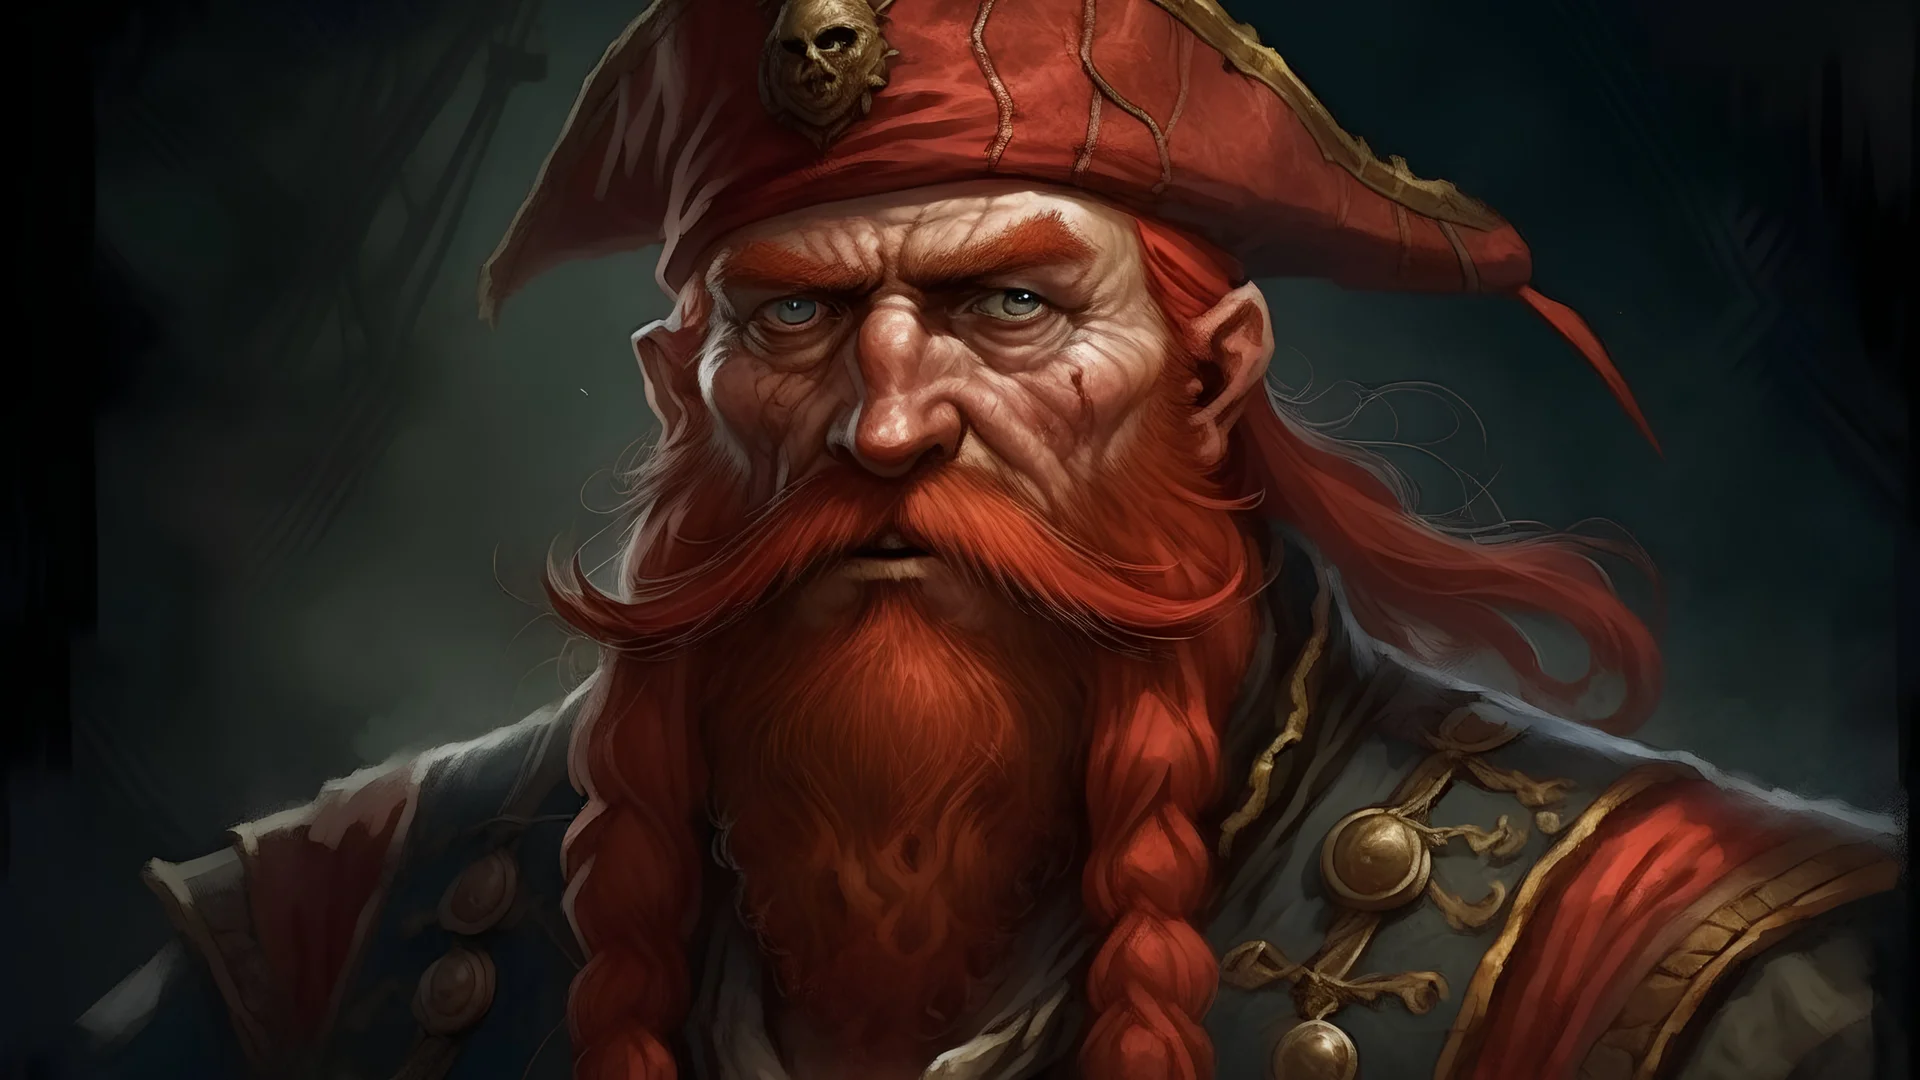 Barbarossa the Red-bearded Pirate